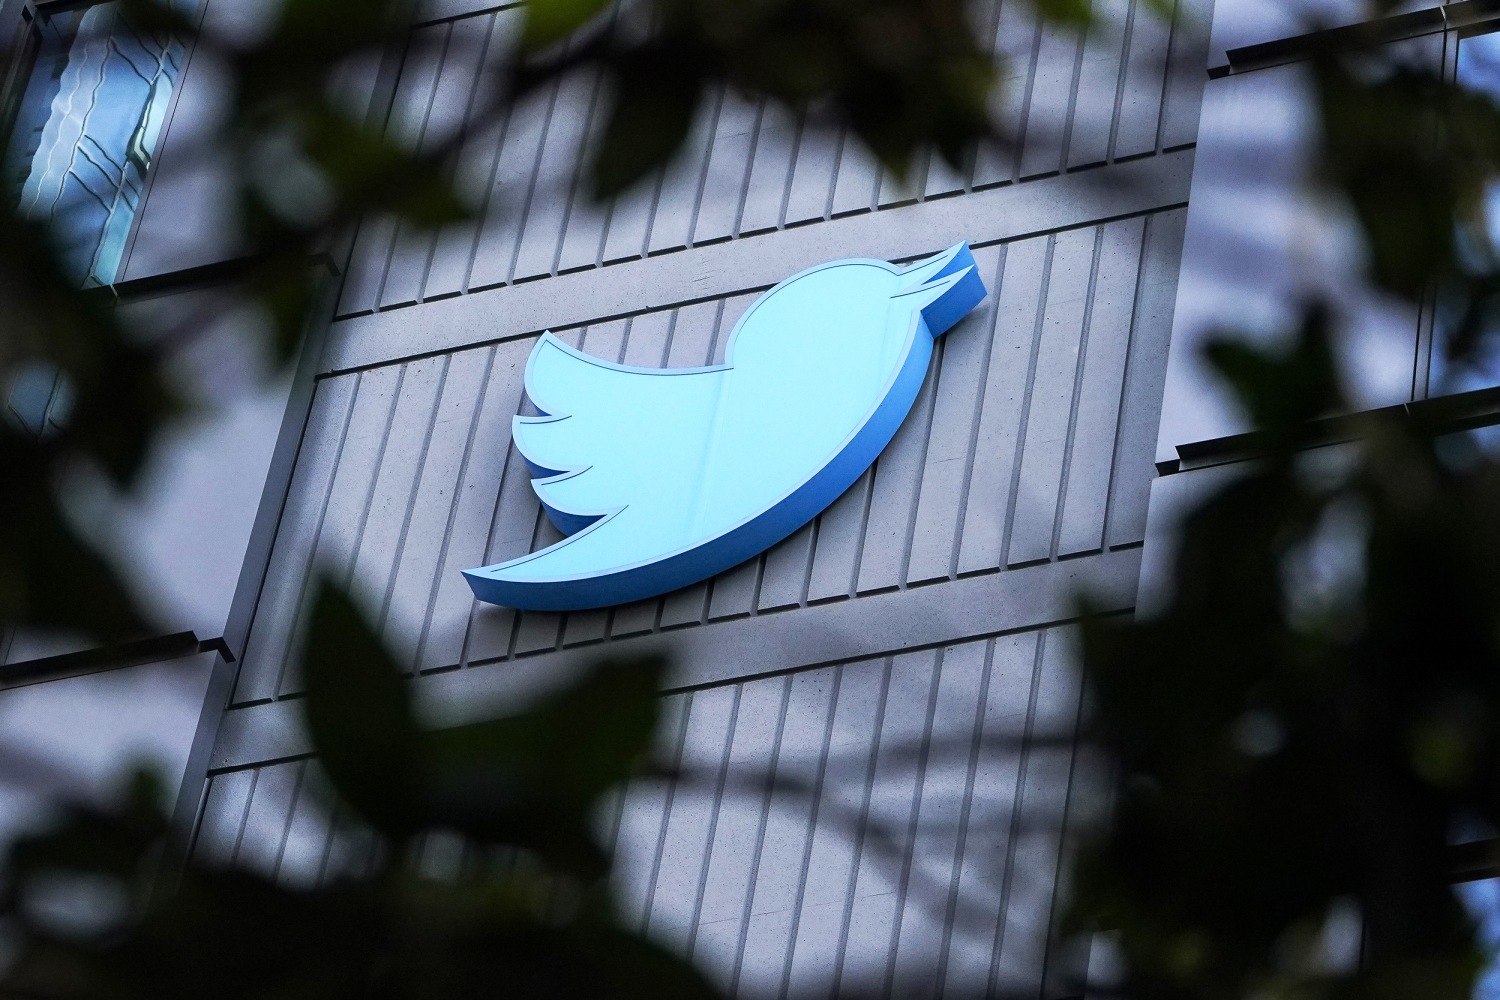 What Twitter's new $7.99 verification option means - The Washington Post